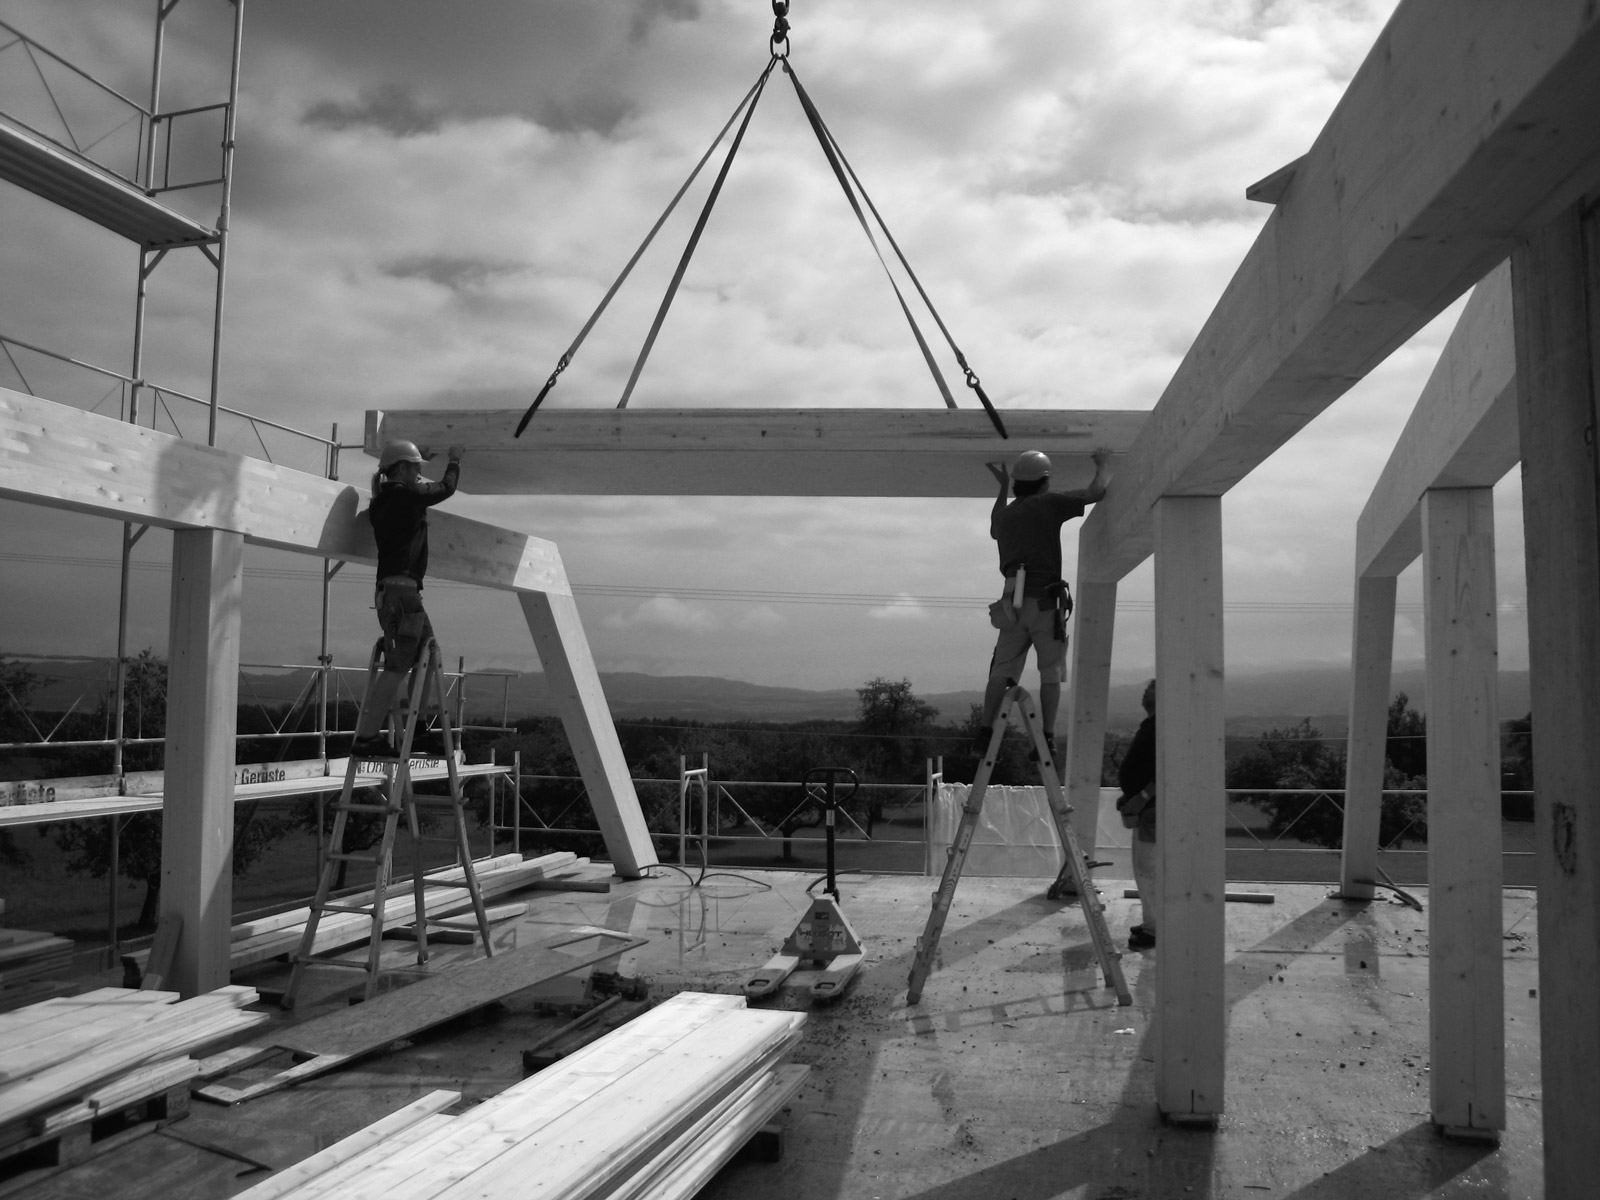 wiggwil farm, roof space during construction